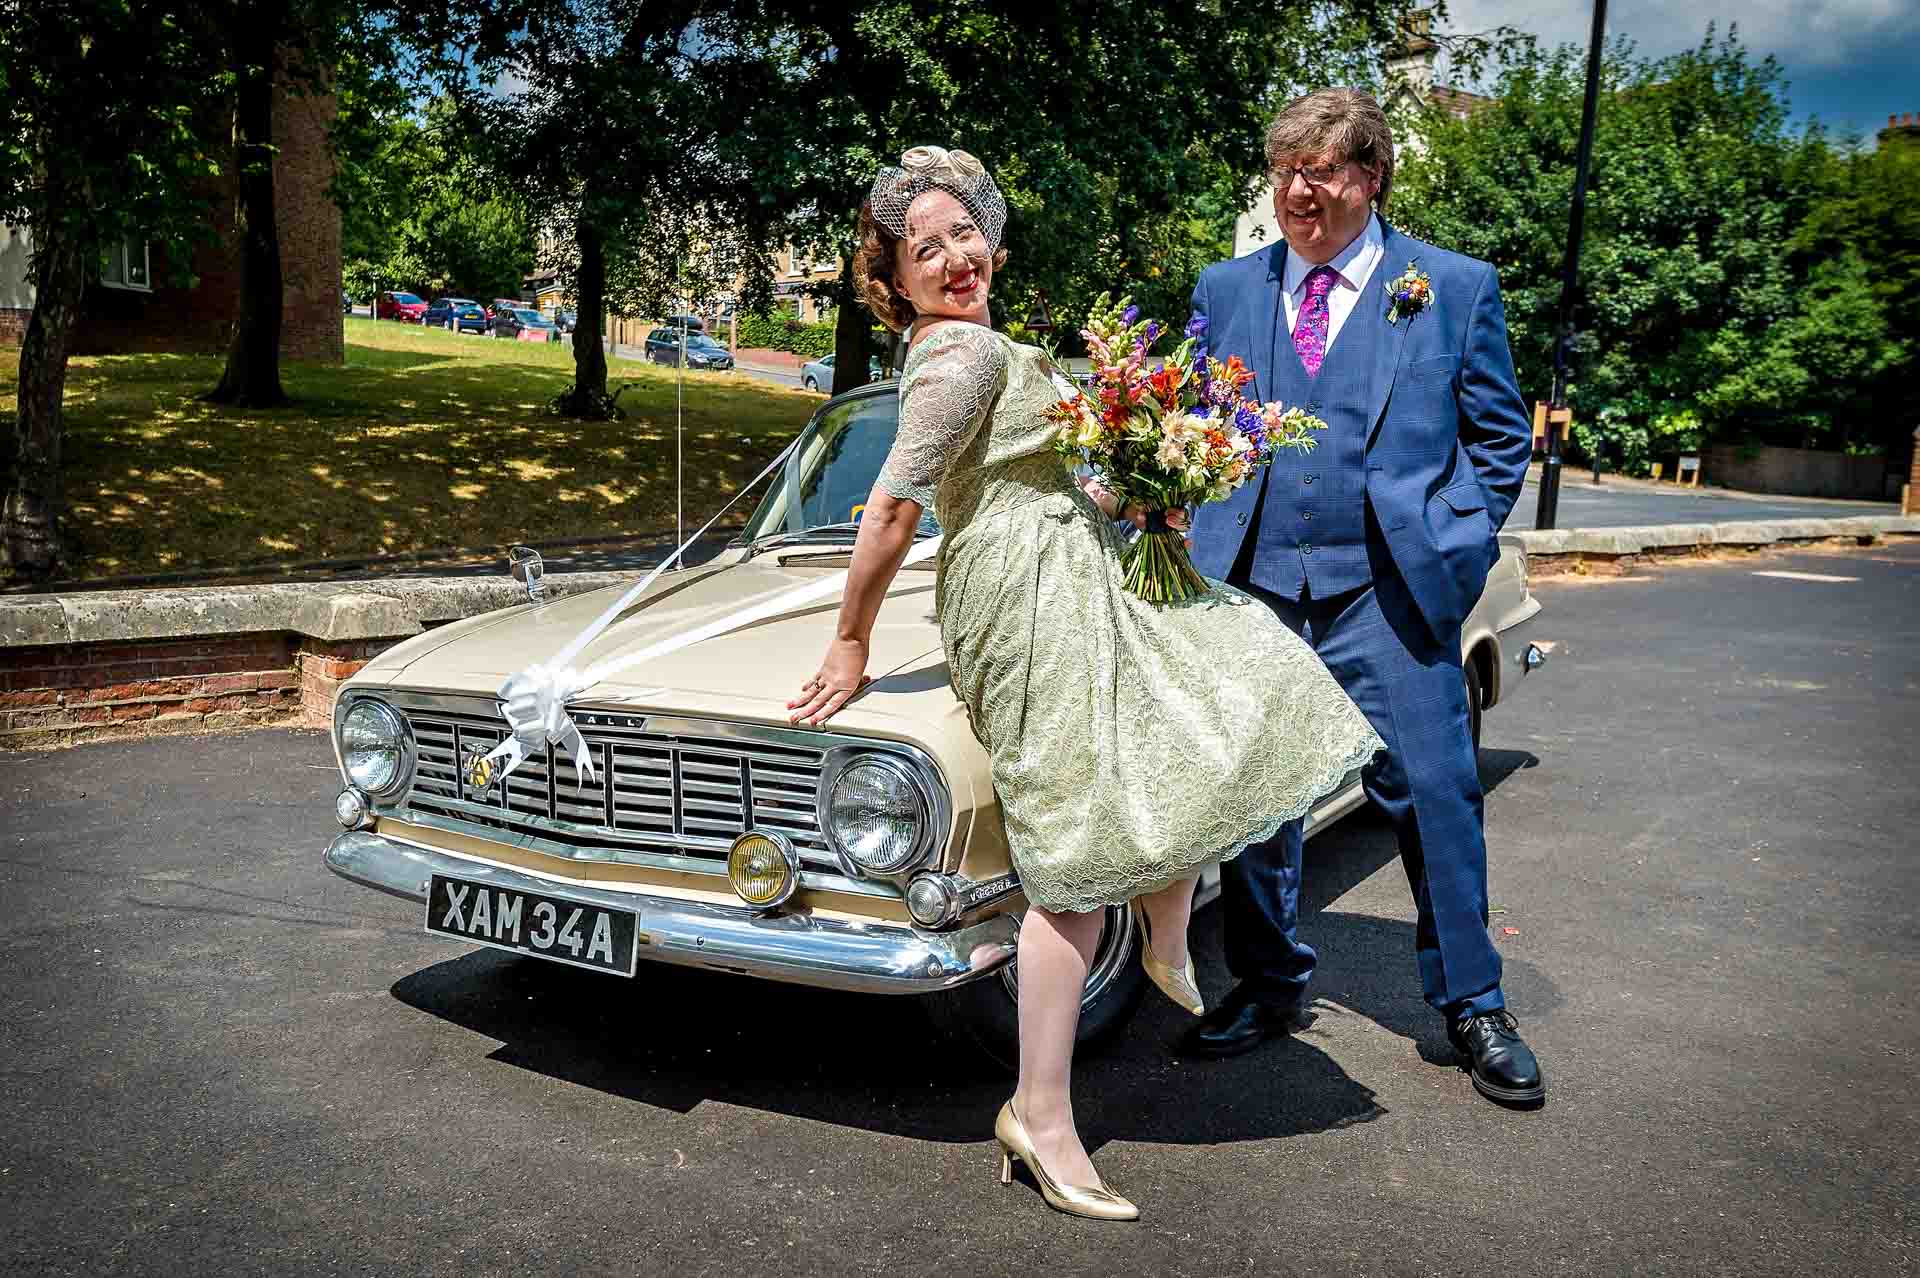 Bride leaning on bonnet of vintage Vauxhall with father watching